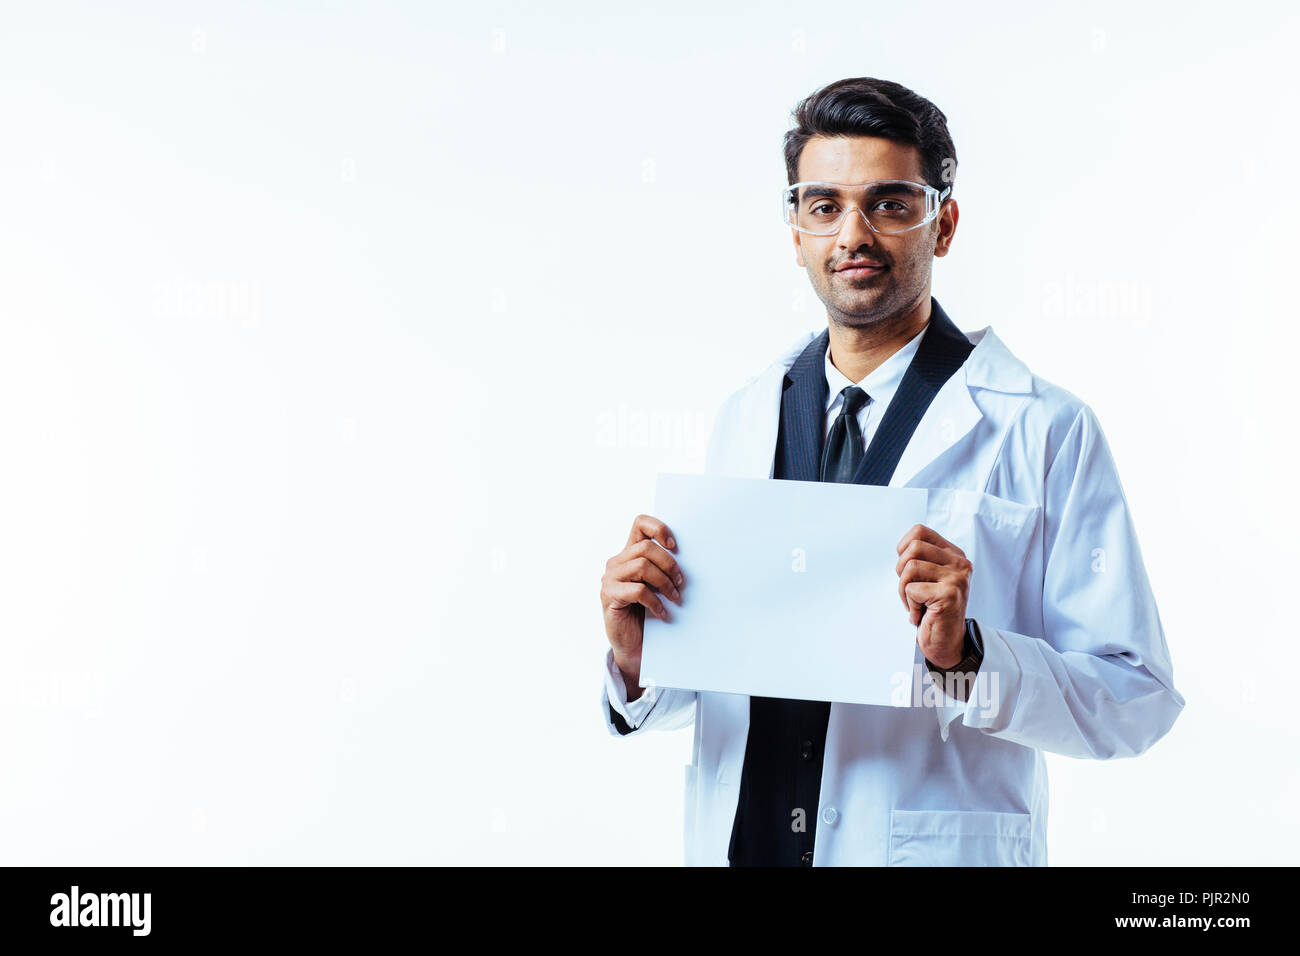 Lab Coat High Resolution Stock Photography and Images - Alamy